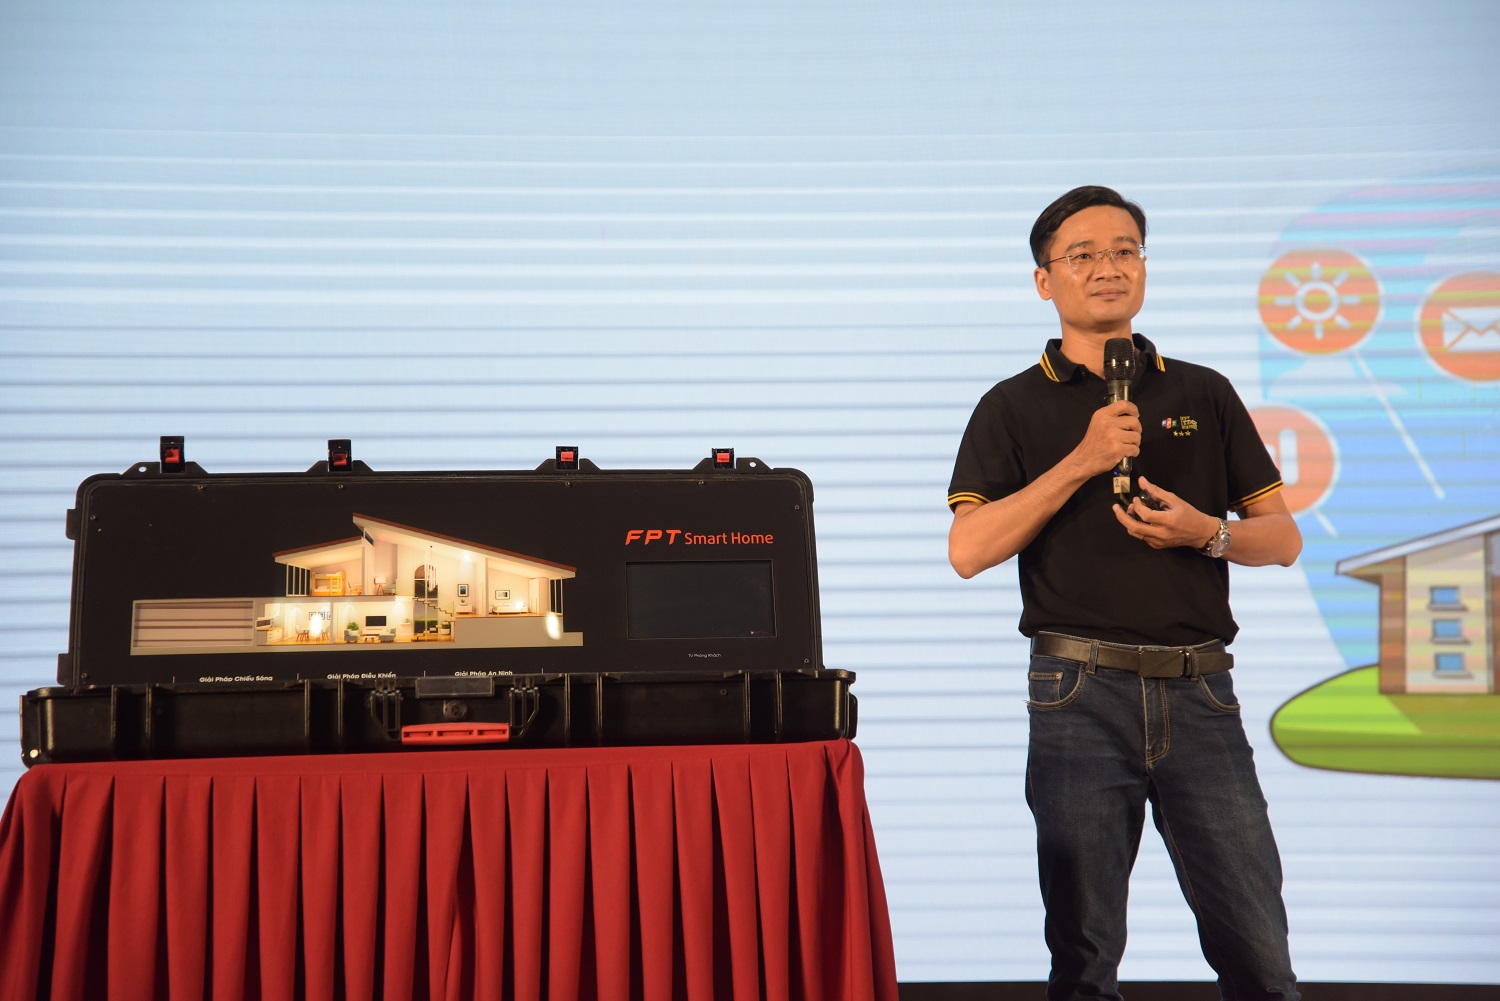 Mr. Truong Van Tuyen - Technical Director of FPT Telecom's Smart Home - used the "nuclear briefcase" to retell the history of the smart home project